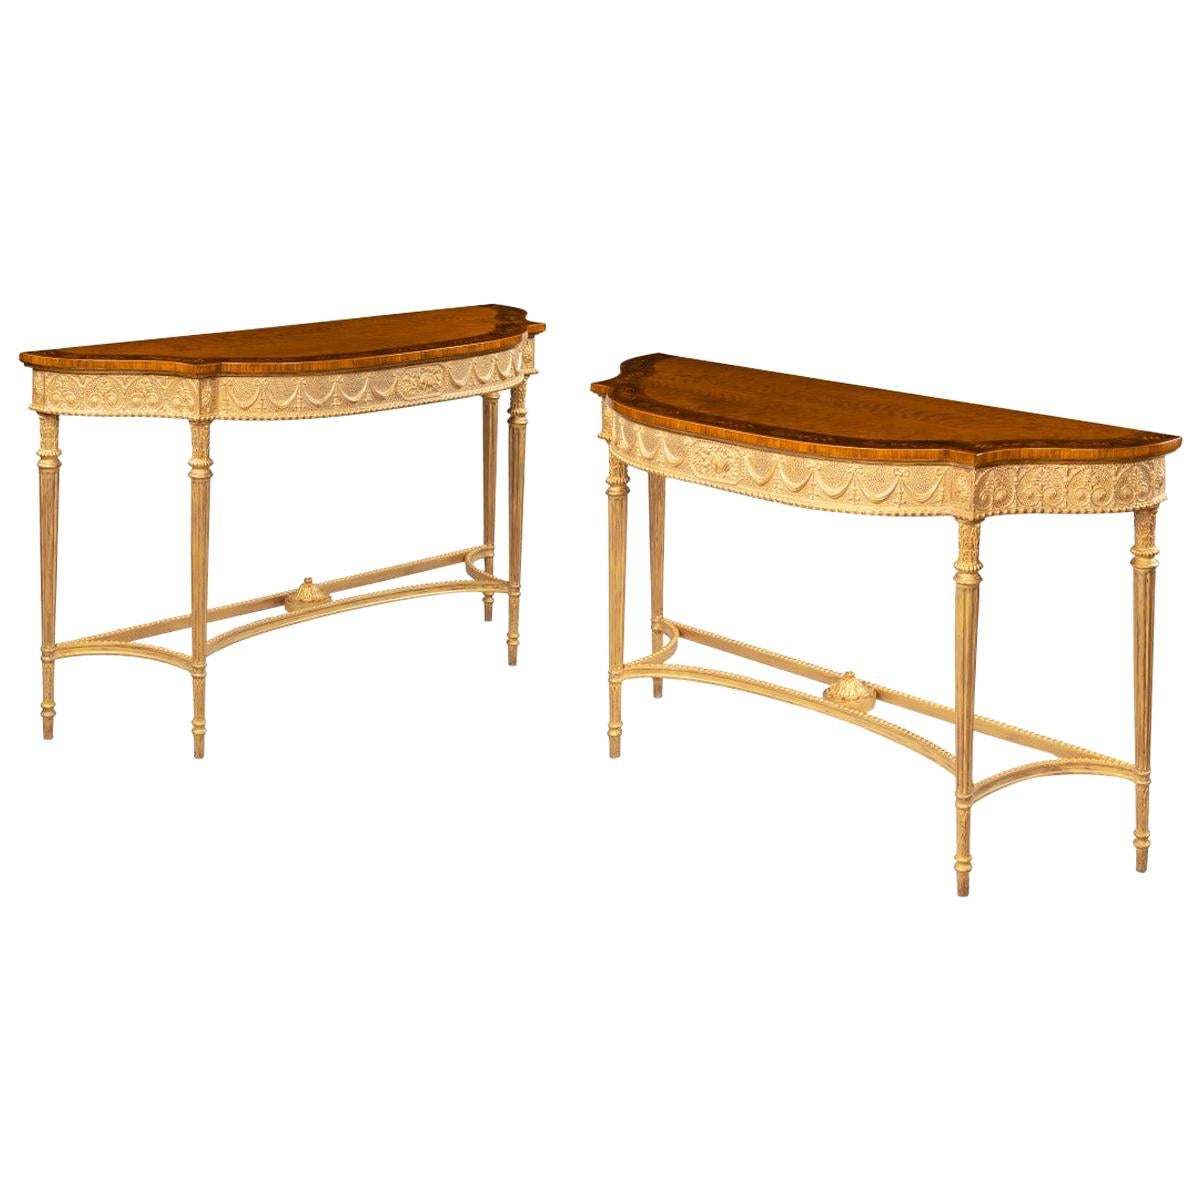 Pair of Victorian Hepplewhite Style Satinwood Console Tables